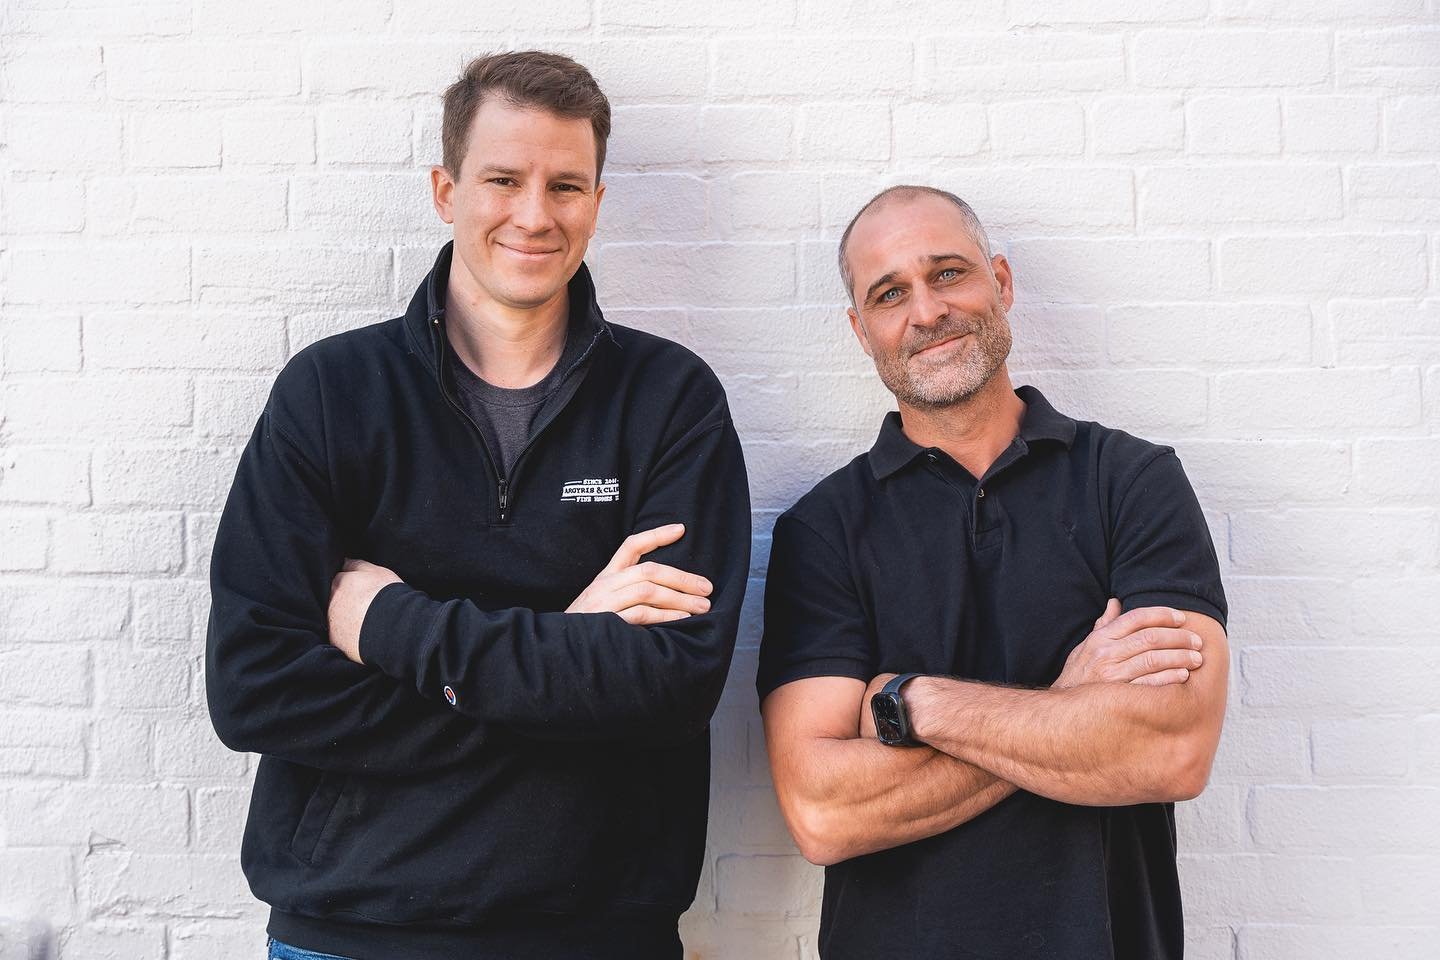 Meet the faces behind Argyris &amp; Clinkard: Liam Argyris and Paul Clinkard. Between them, they have 40+ years of custom renovation and construction experience. Always delivering quality. Always delivering value. Always delivering excellence. 

Chec